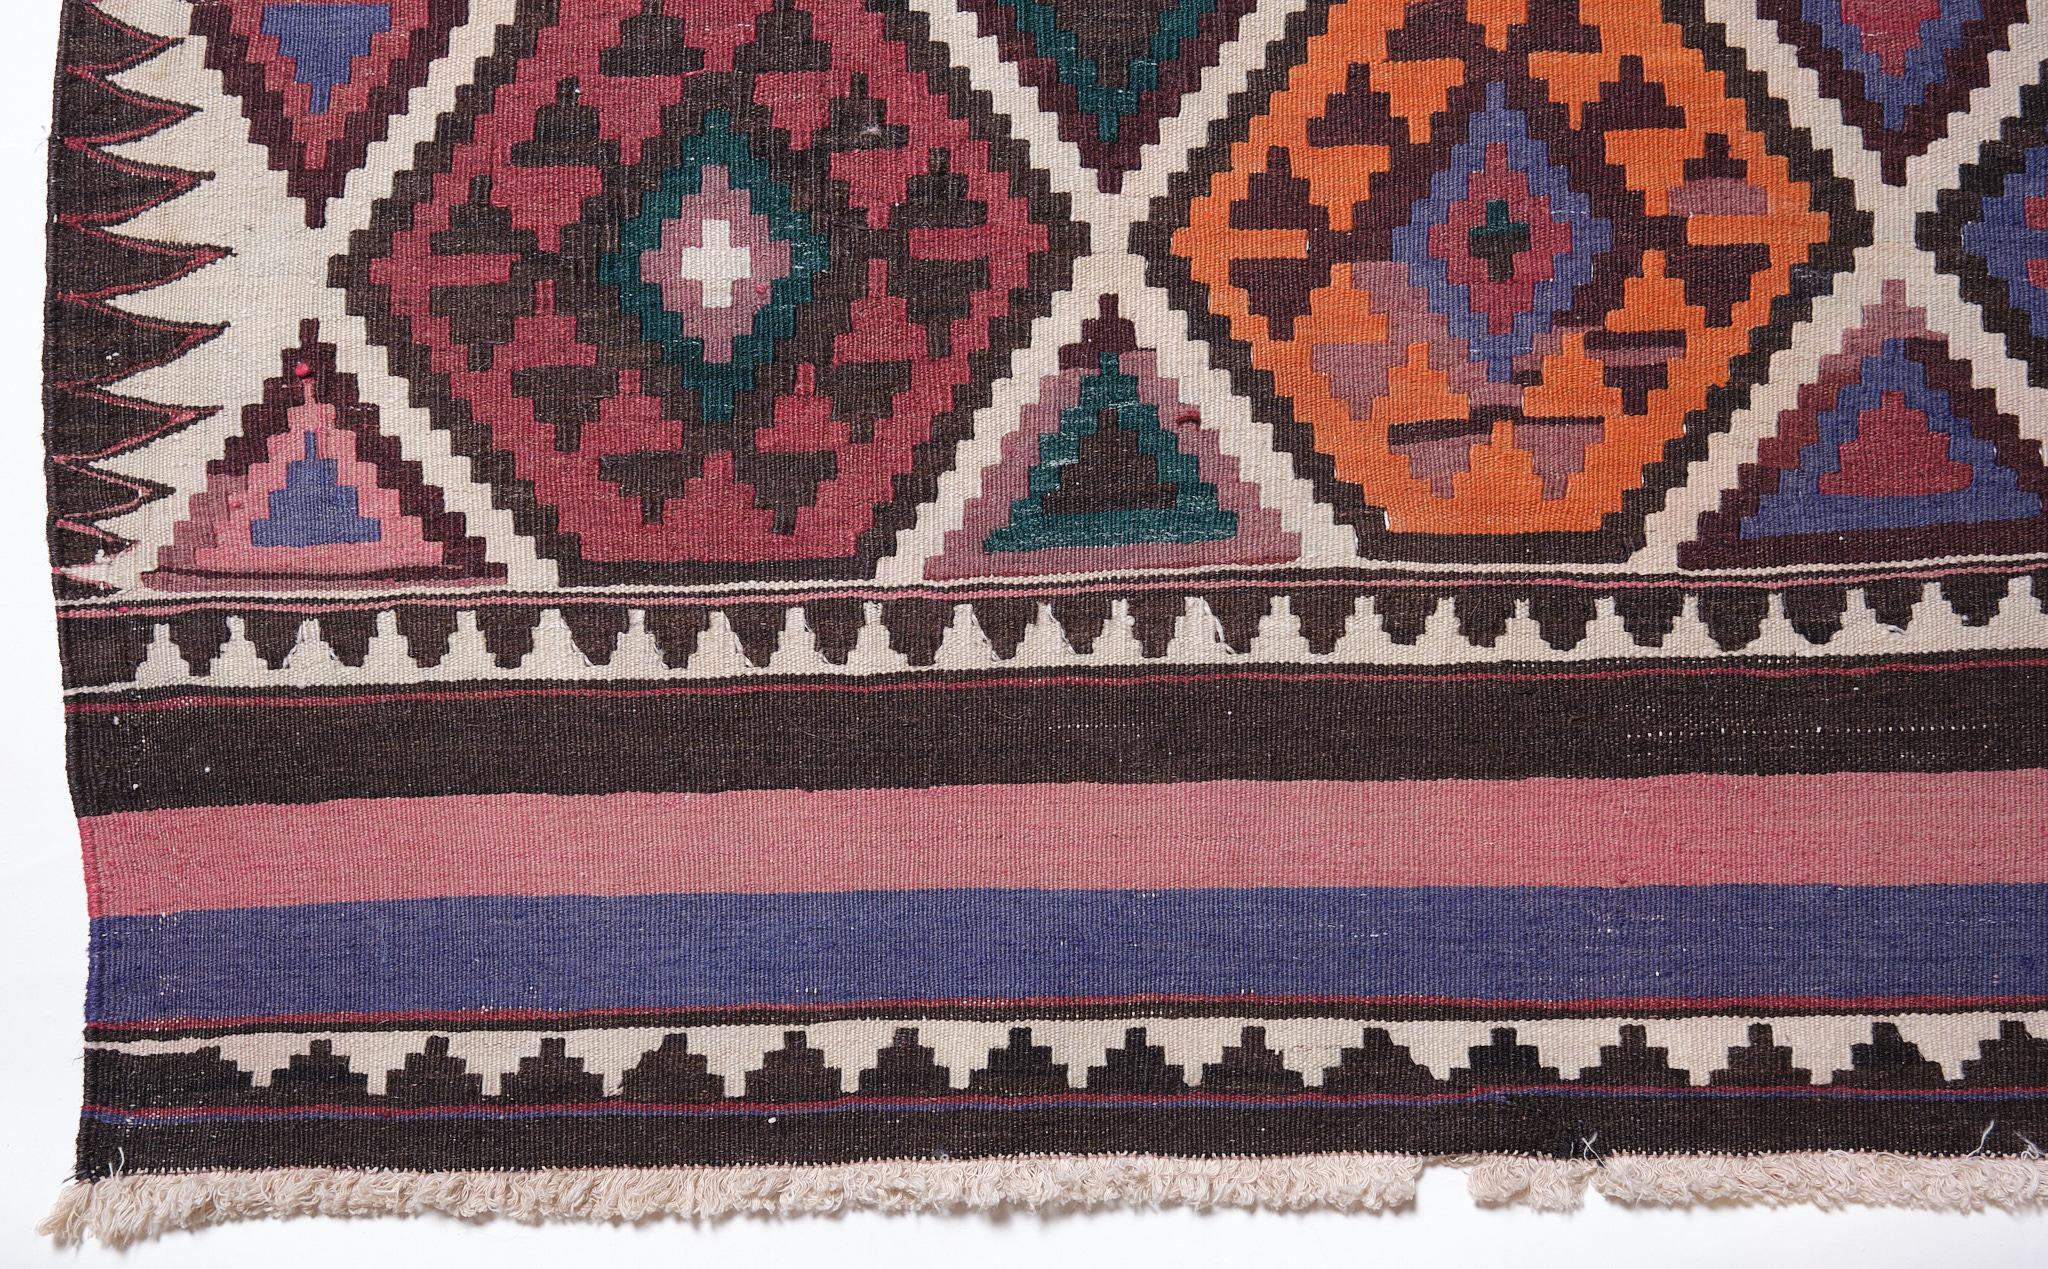 This is an old Shirvan Kilim from the Caucasus region with a rare and beautiful color composition.

Of the four countries that make up the Caucasus, Azerbaijan produces the most kilims, and the land has a long history of weaving. The nomadic